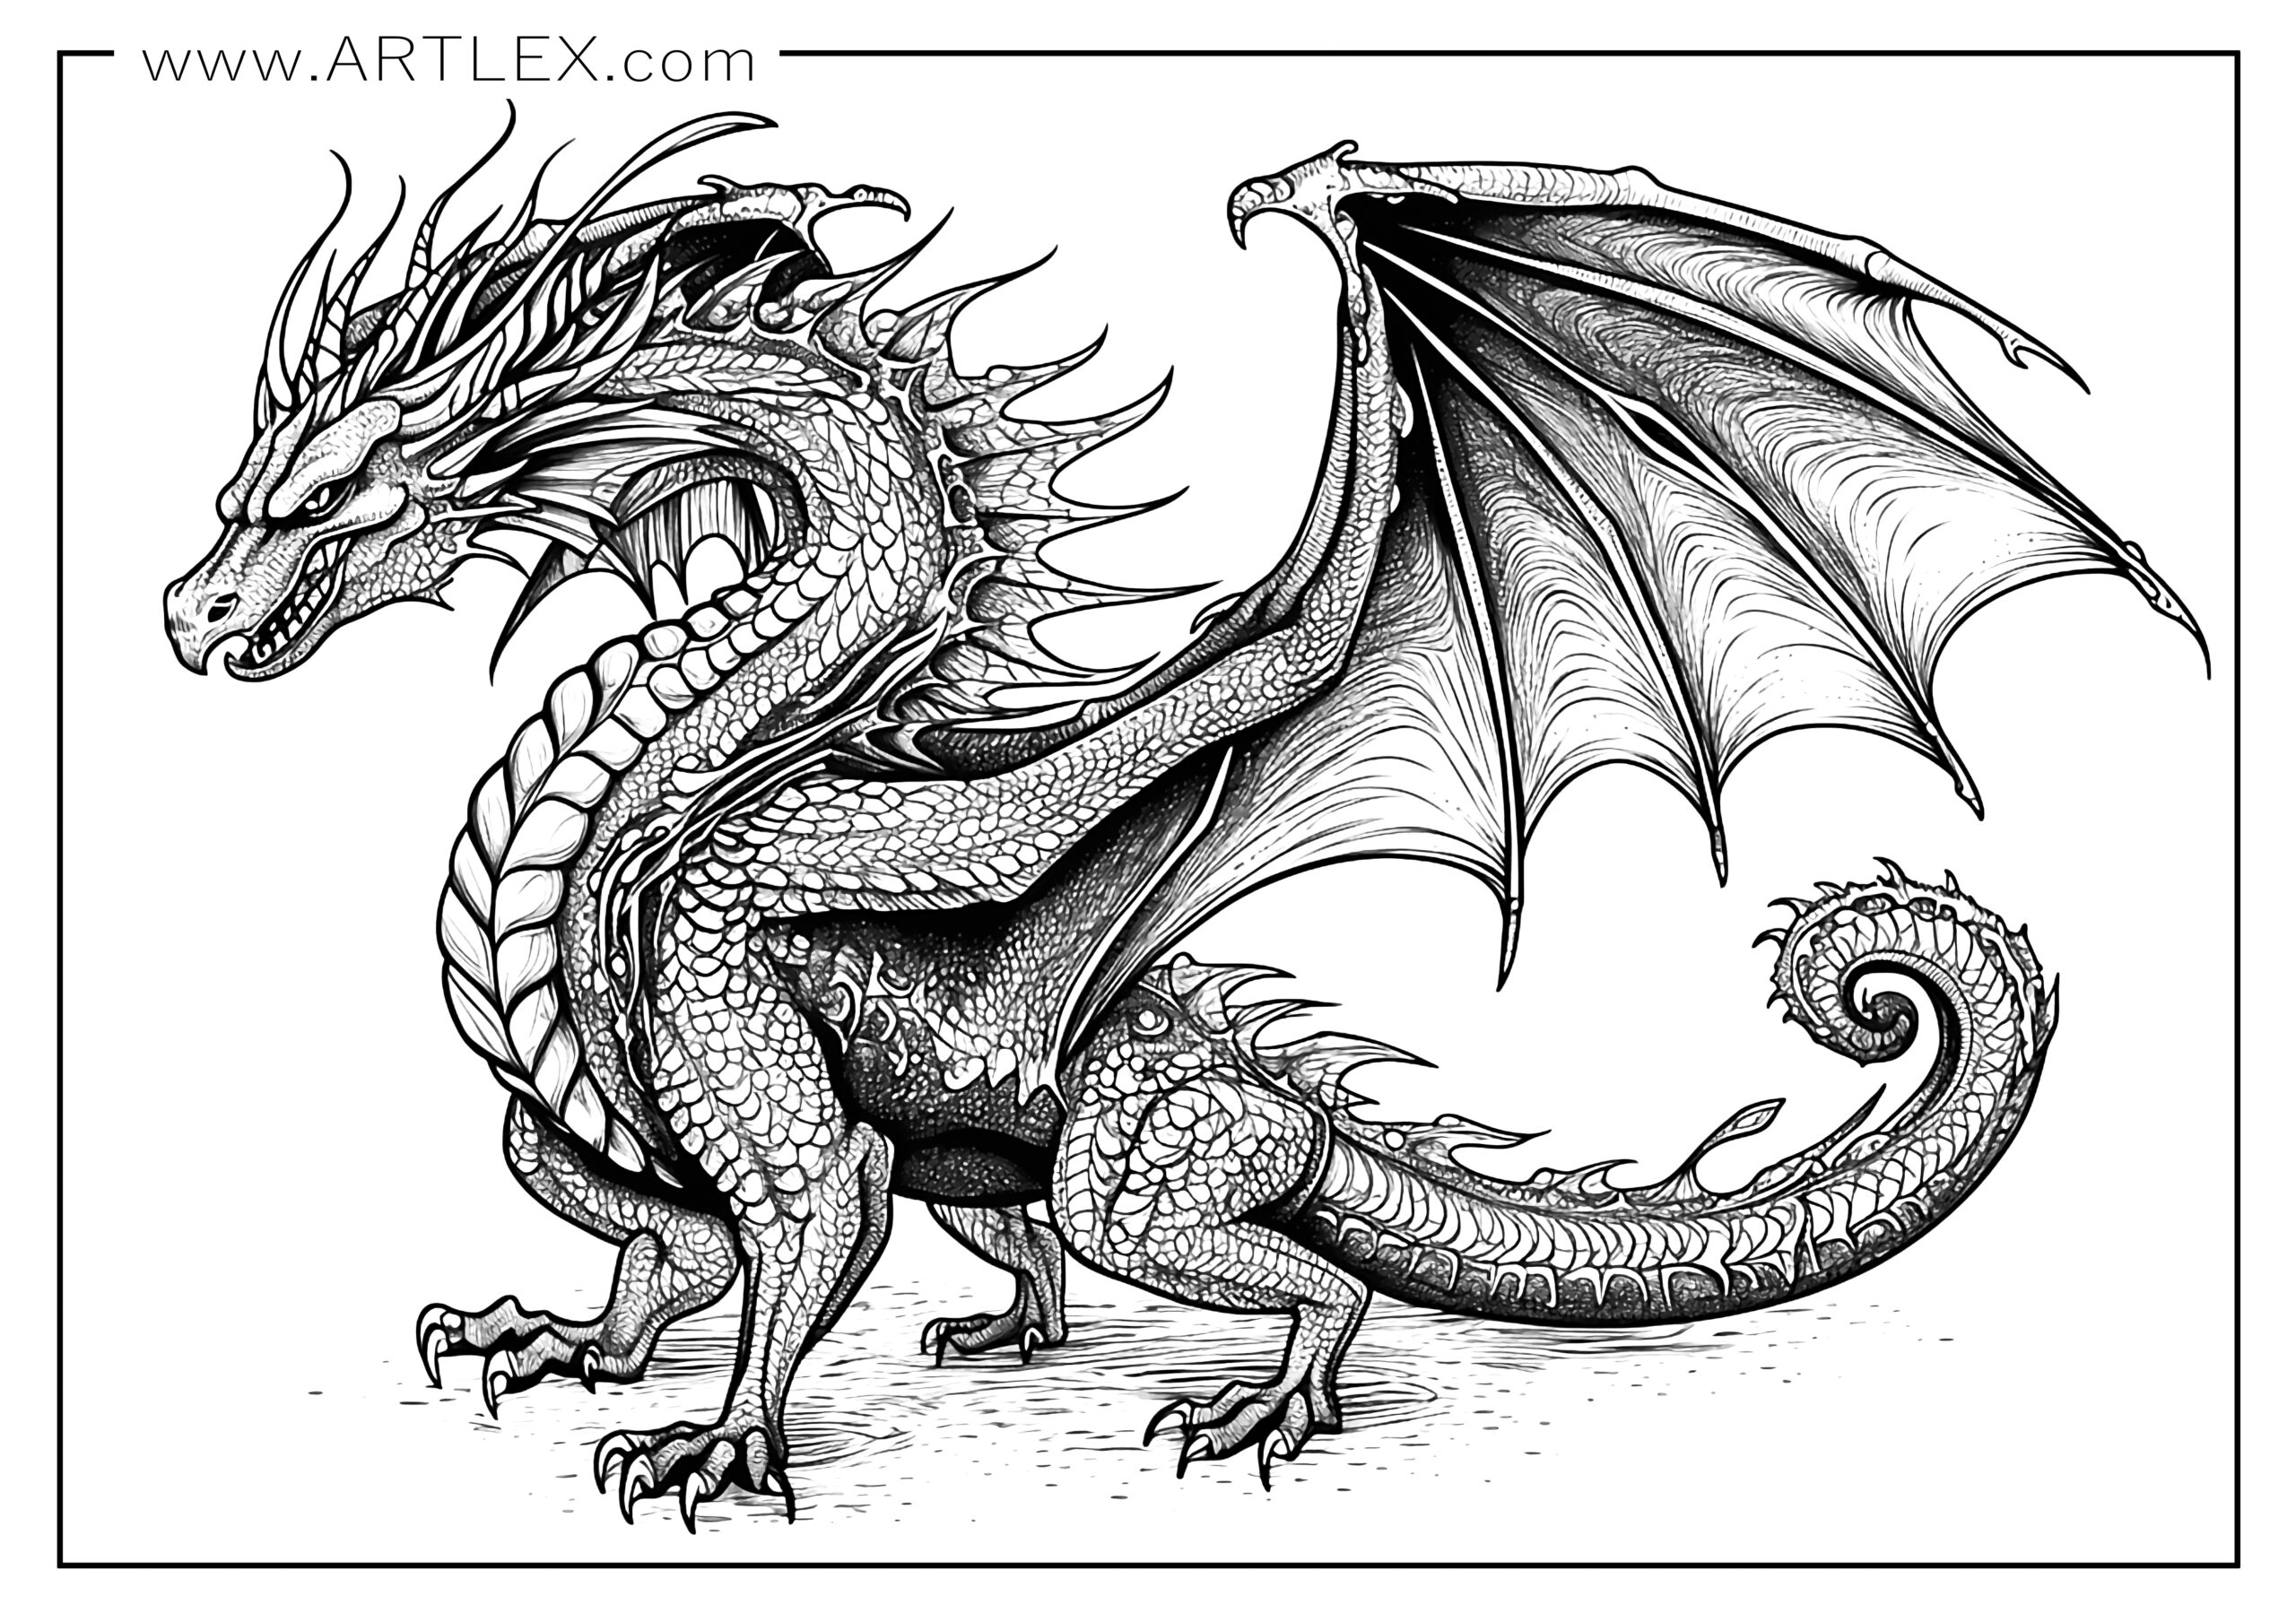 10 Free Dragon Coloring Pages (Free + Printable) Artlex